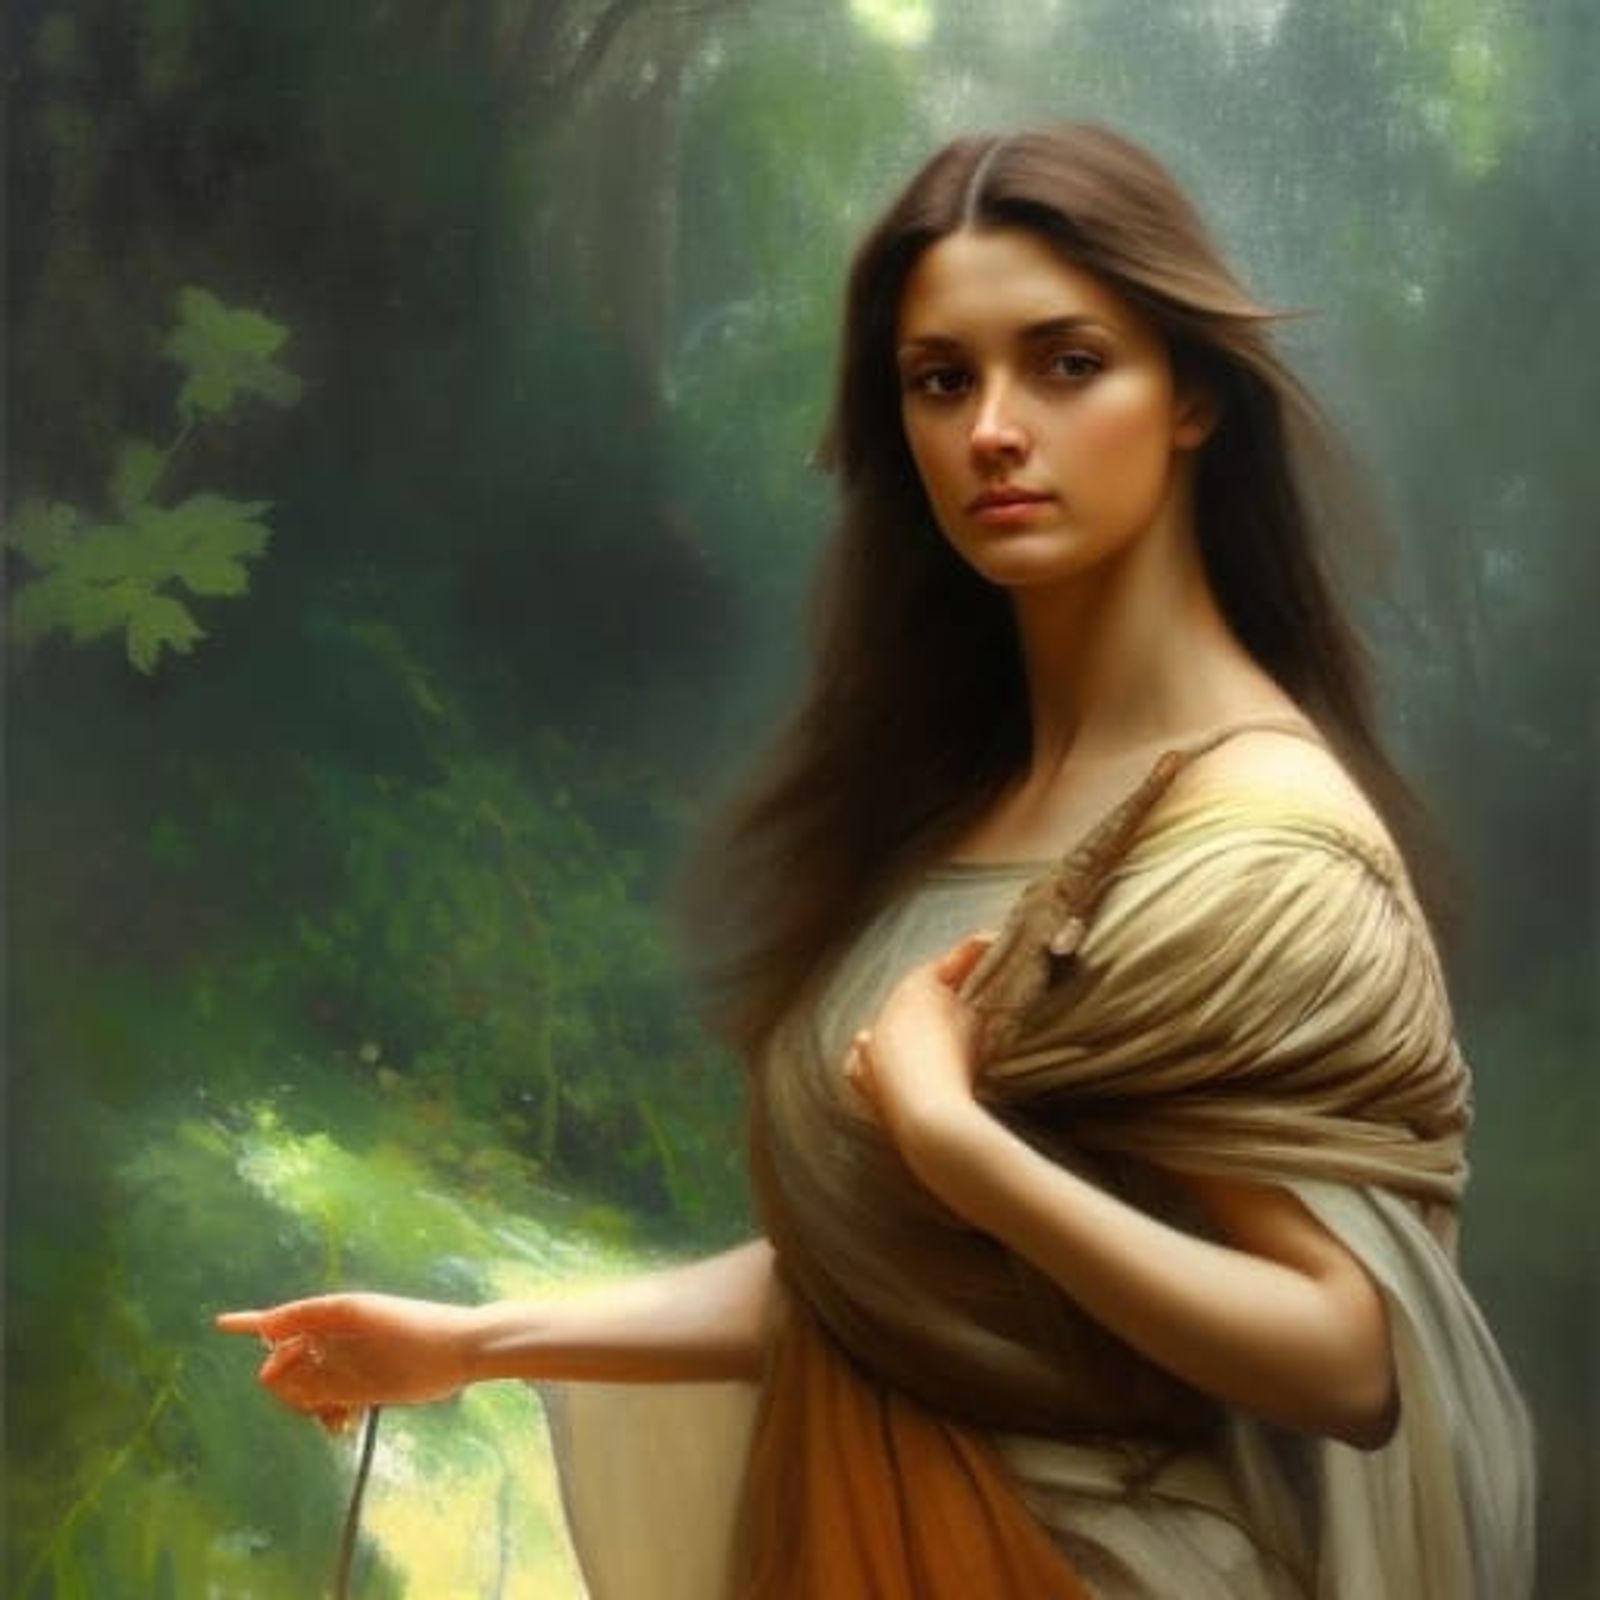 ancient greek woman painting